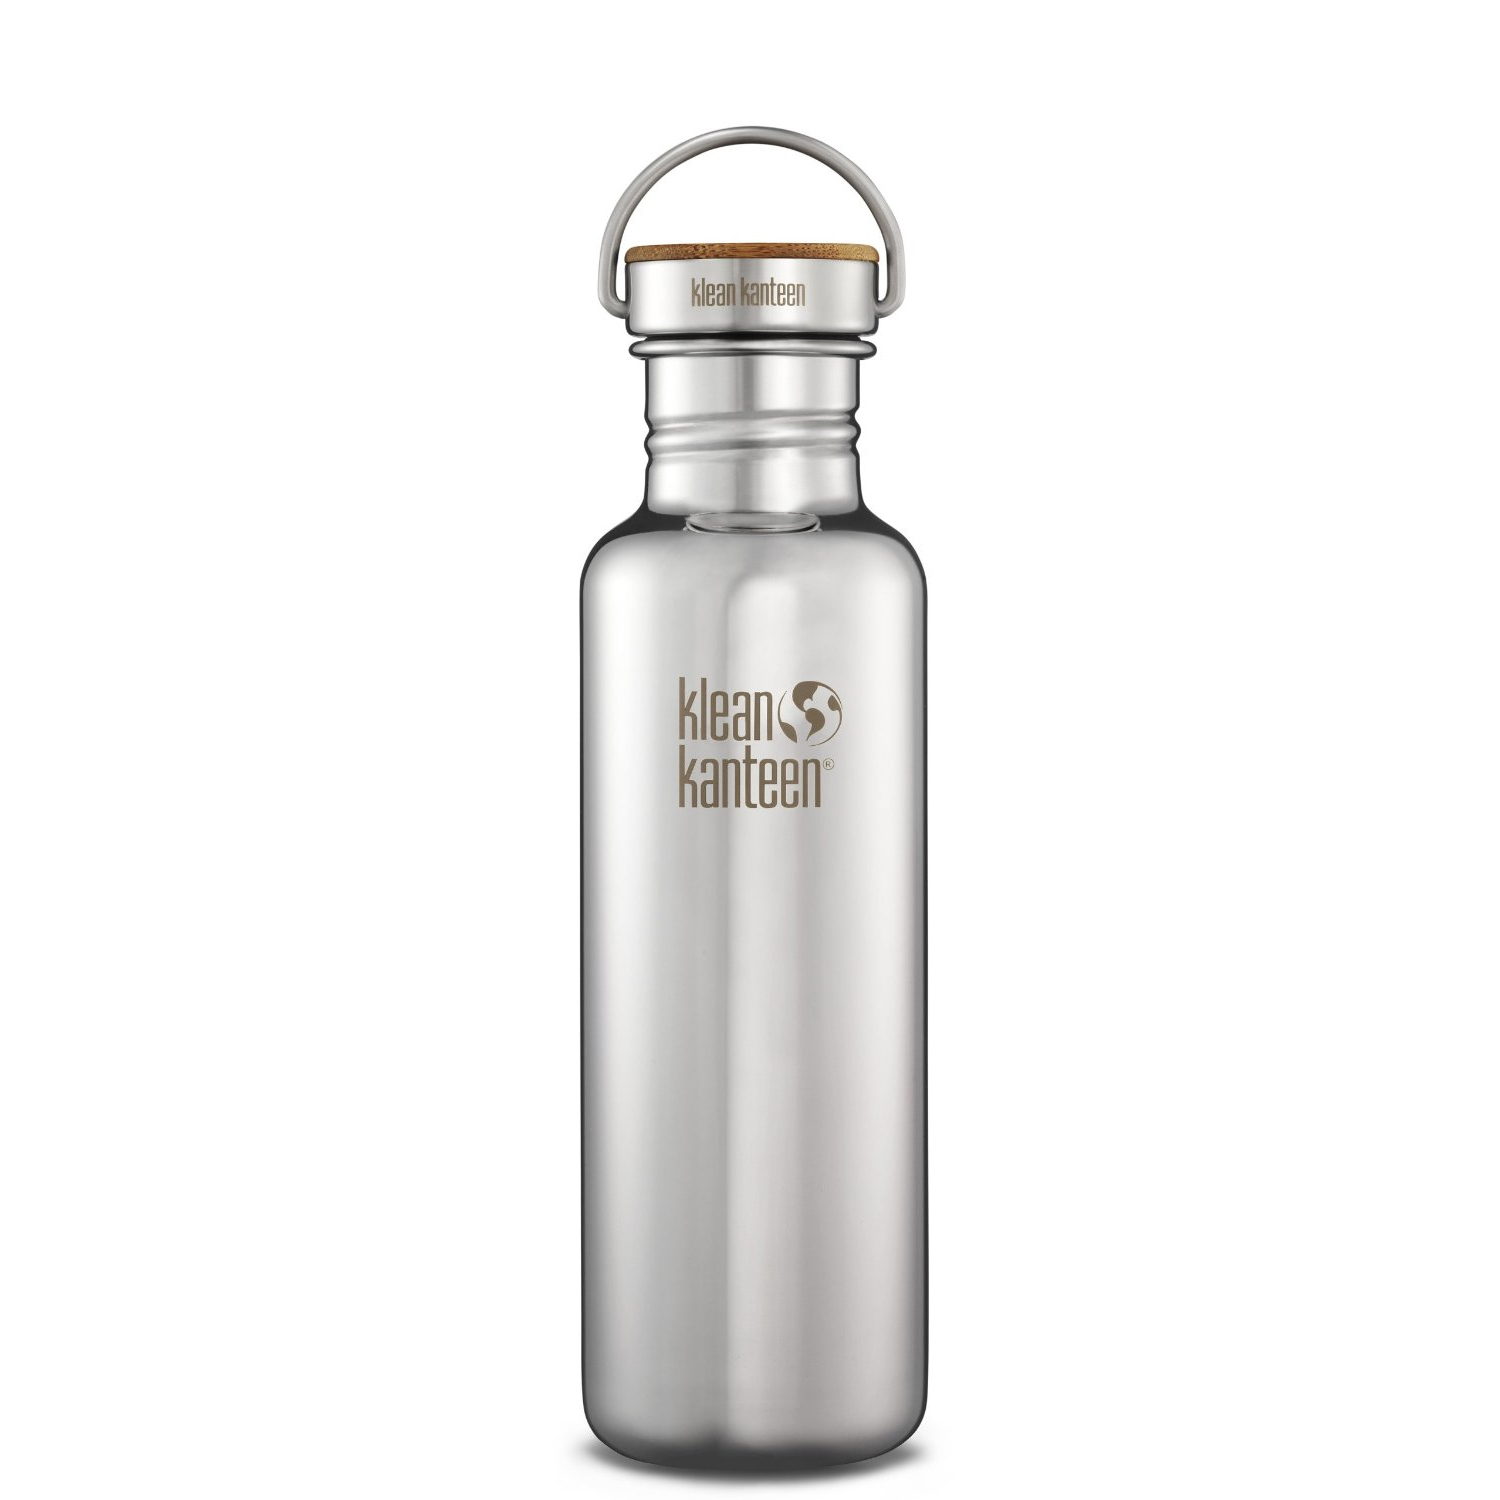 https://scale.coolshop-cdn.com/product-media.coolshop-cdn.com/AH692P/f4d725693b4d43ca982303f77f871a8f.jpeg/f/klean-kanteen-reflect-mirrored-800ml-stainless-steel-bottle-with-bamboo-cap.jpeg